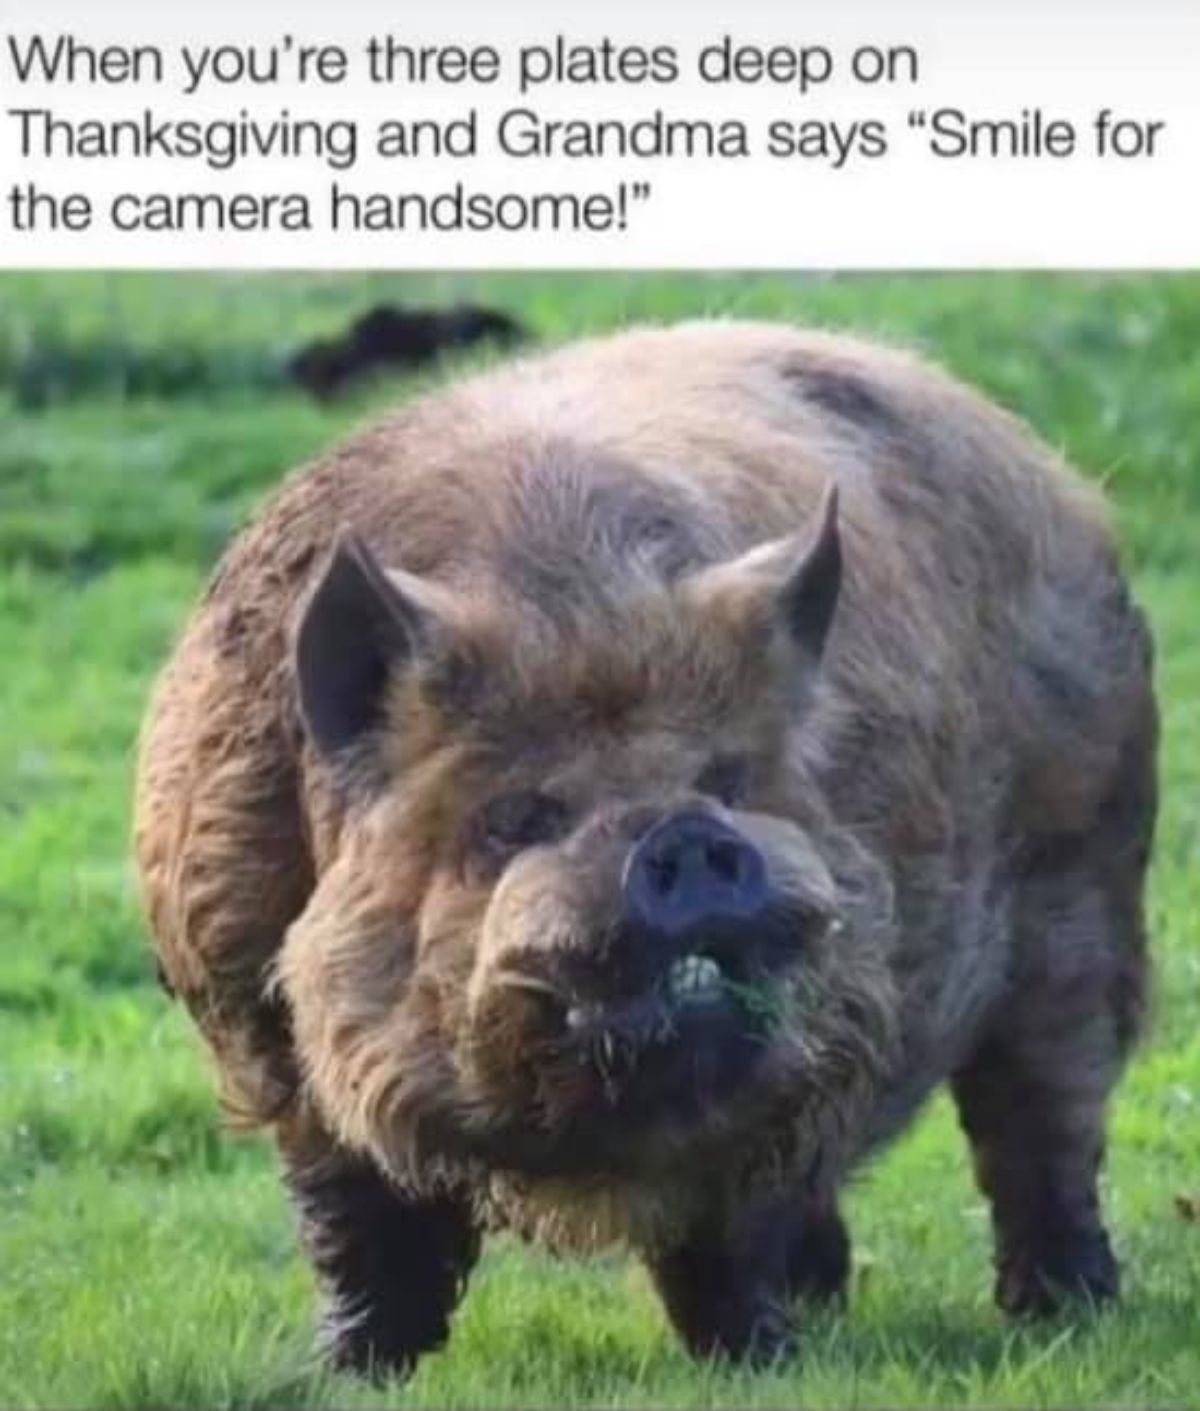 thanksgiving meme wholesome - When you're three plates deep on Thanksgiving and Grandma says "Smile for the camera handsome!"